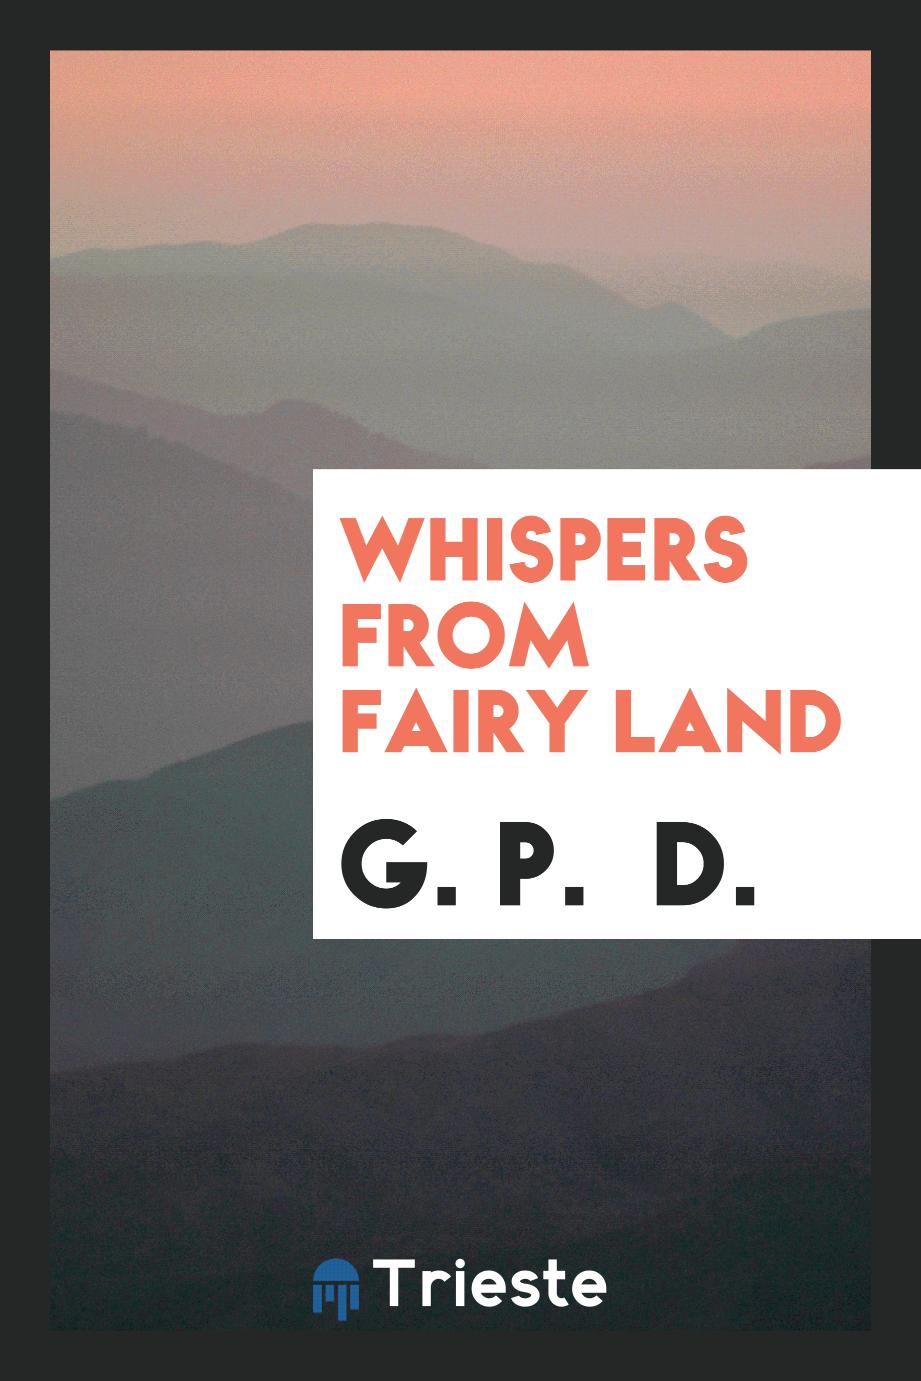 Whispers from fairy land